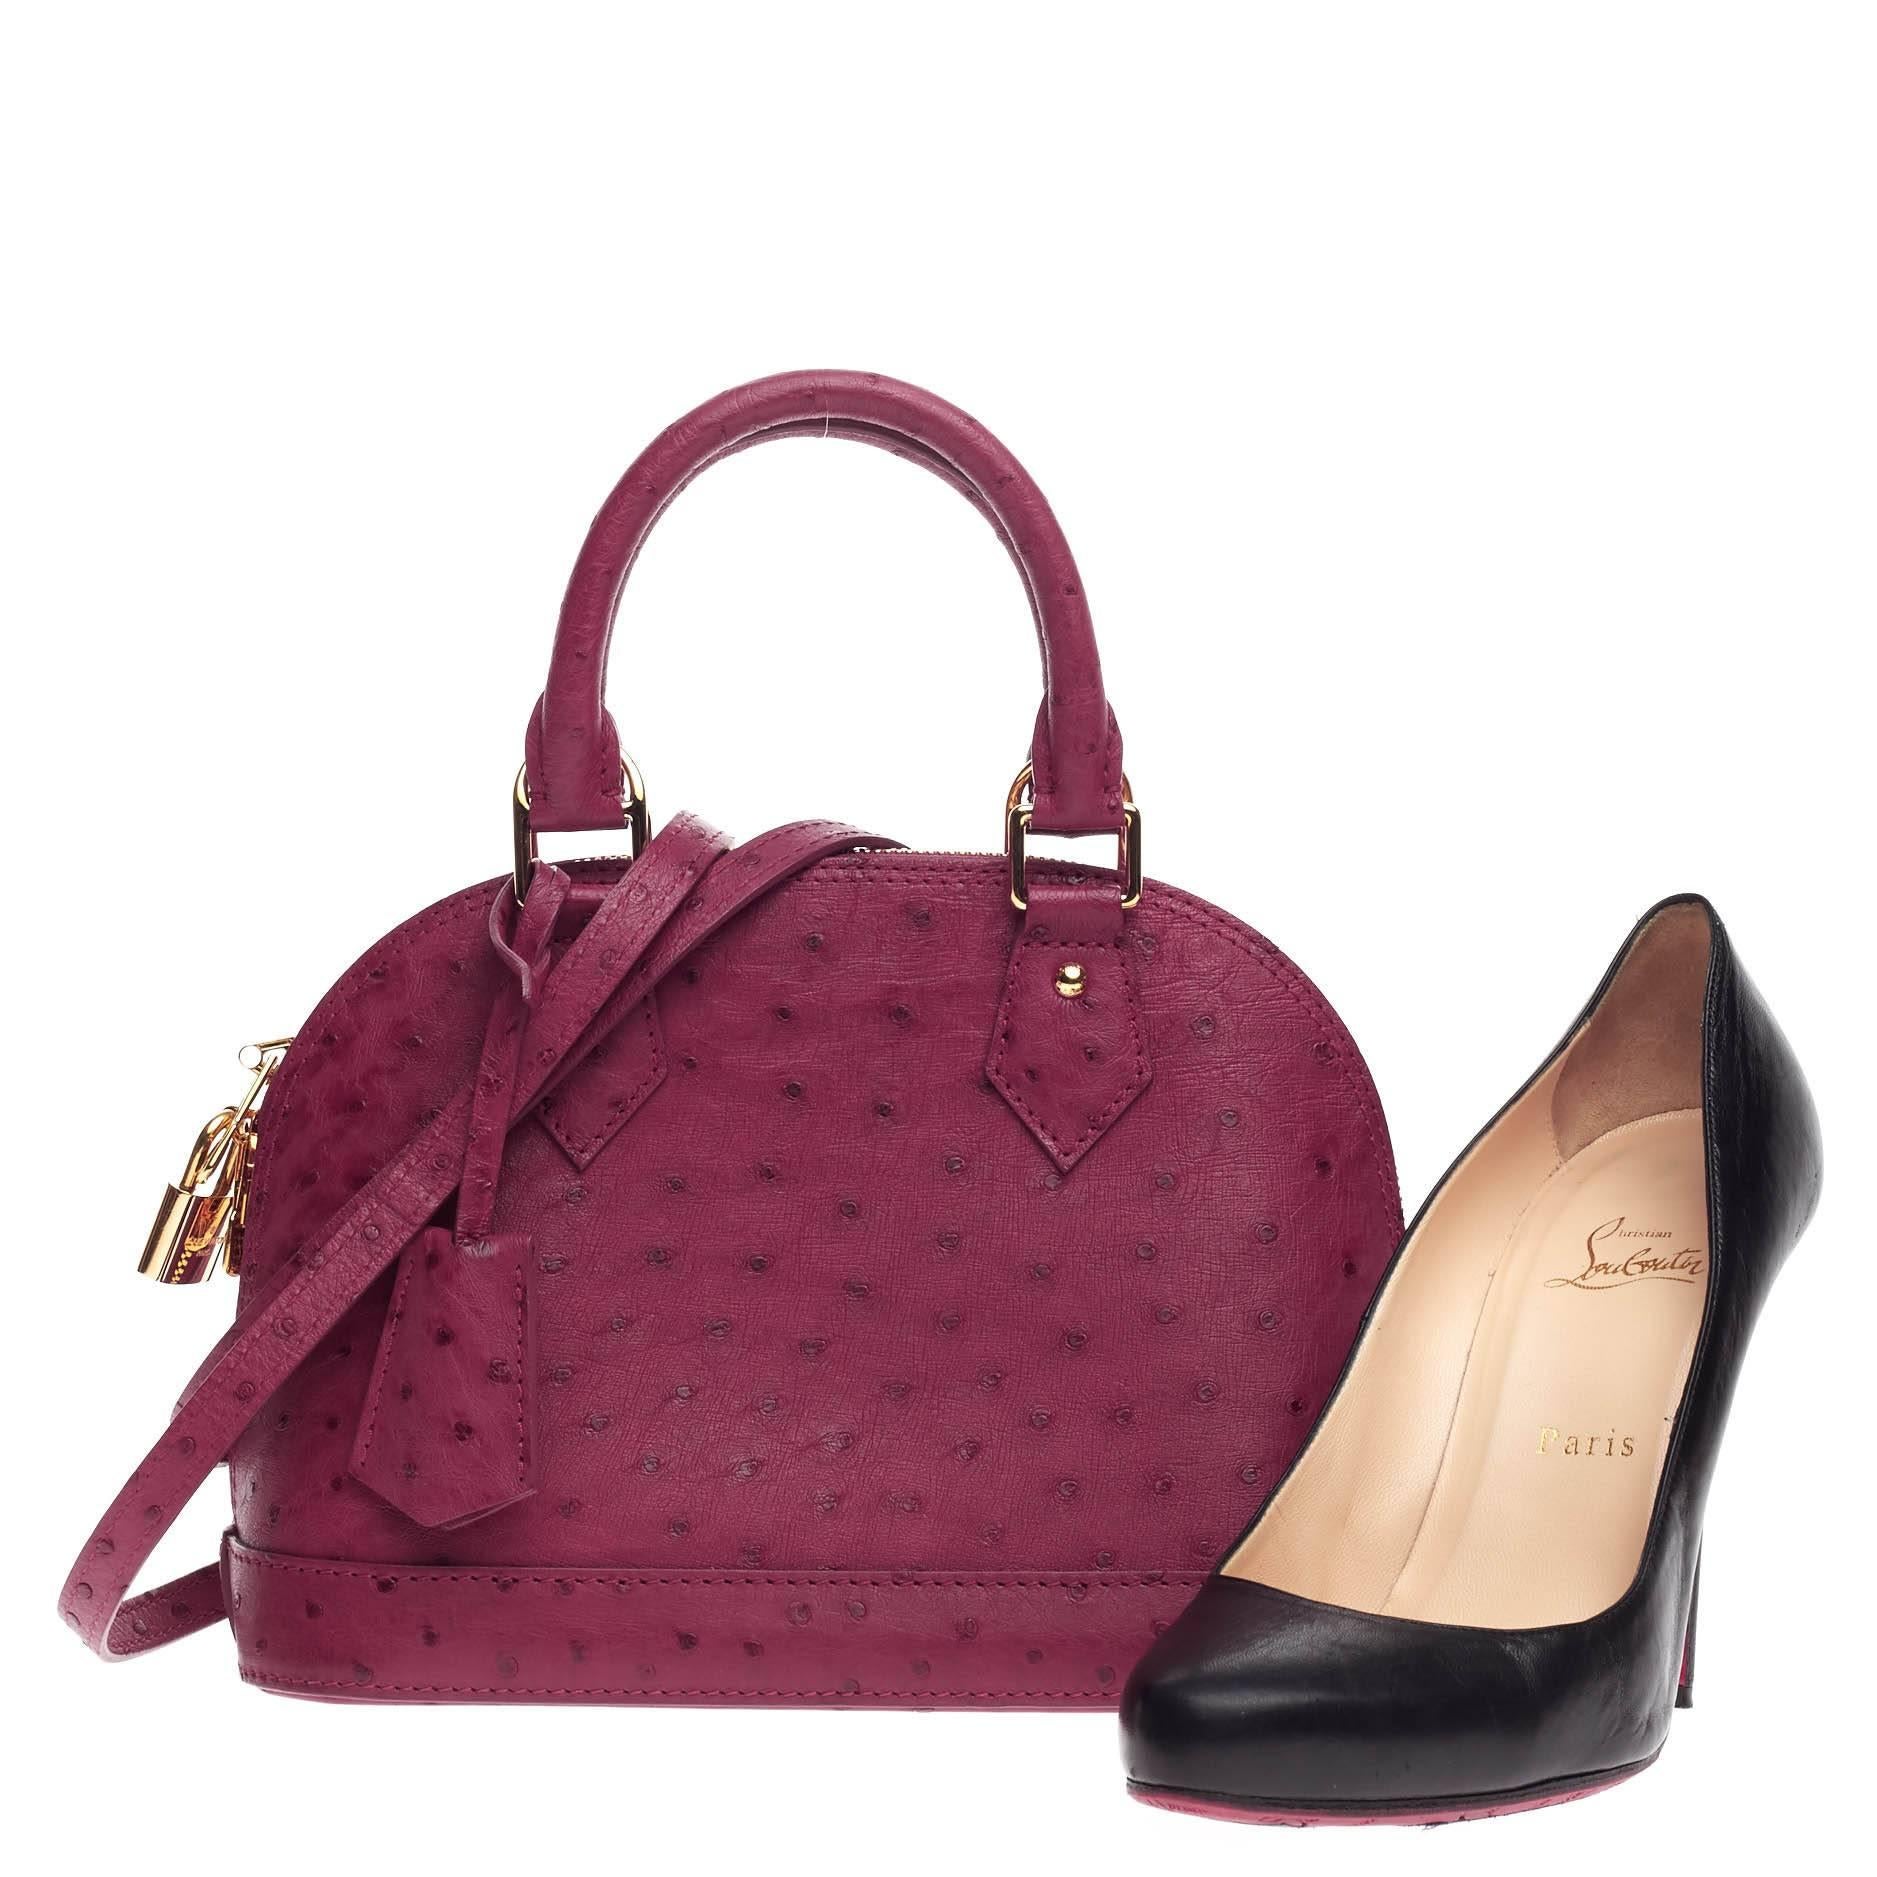 This authentic Louis Vuitton Alma Ostrich BB is a chic and sophisticated bag perfect for everyday use. Constructed in genuine fuchsia ostrich skin, this petite dome-like bag features a sturdy base, protective base studs, dual-rolled handles,